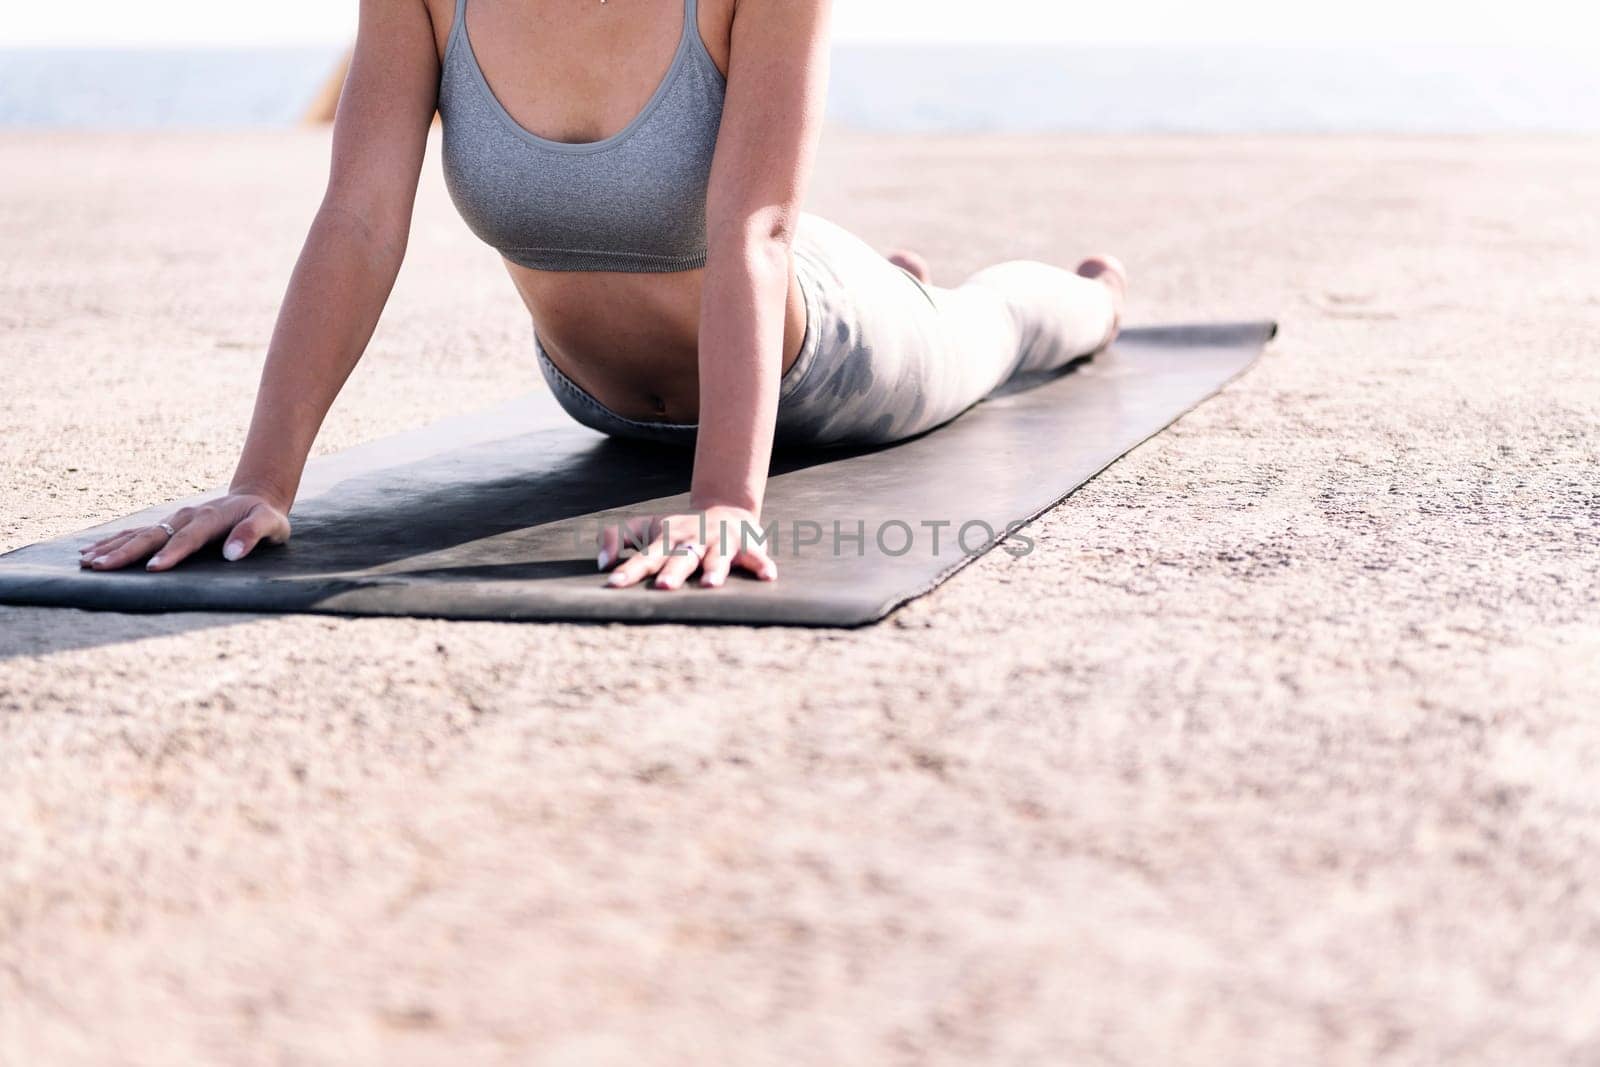 unrecognizable woman in sportswear doing yoga by the sea, concept of mental relaxation and healthy lifestyle, copy space for text